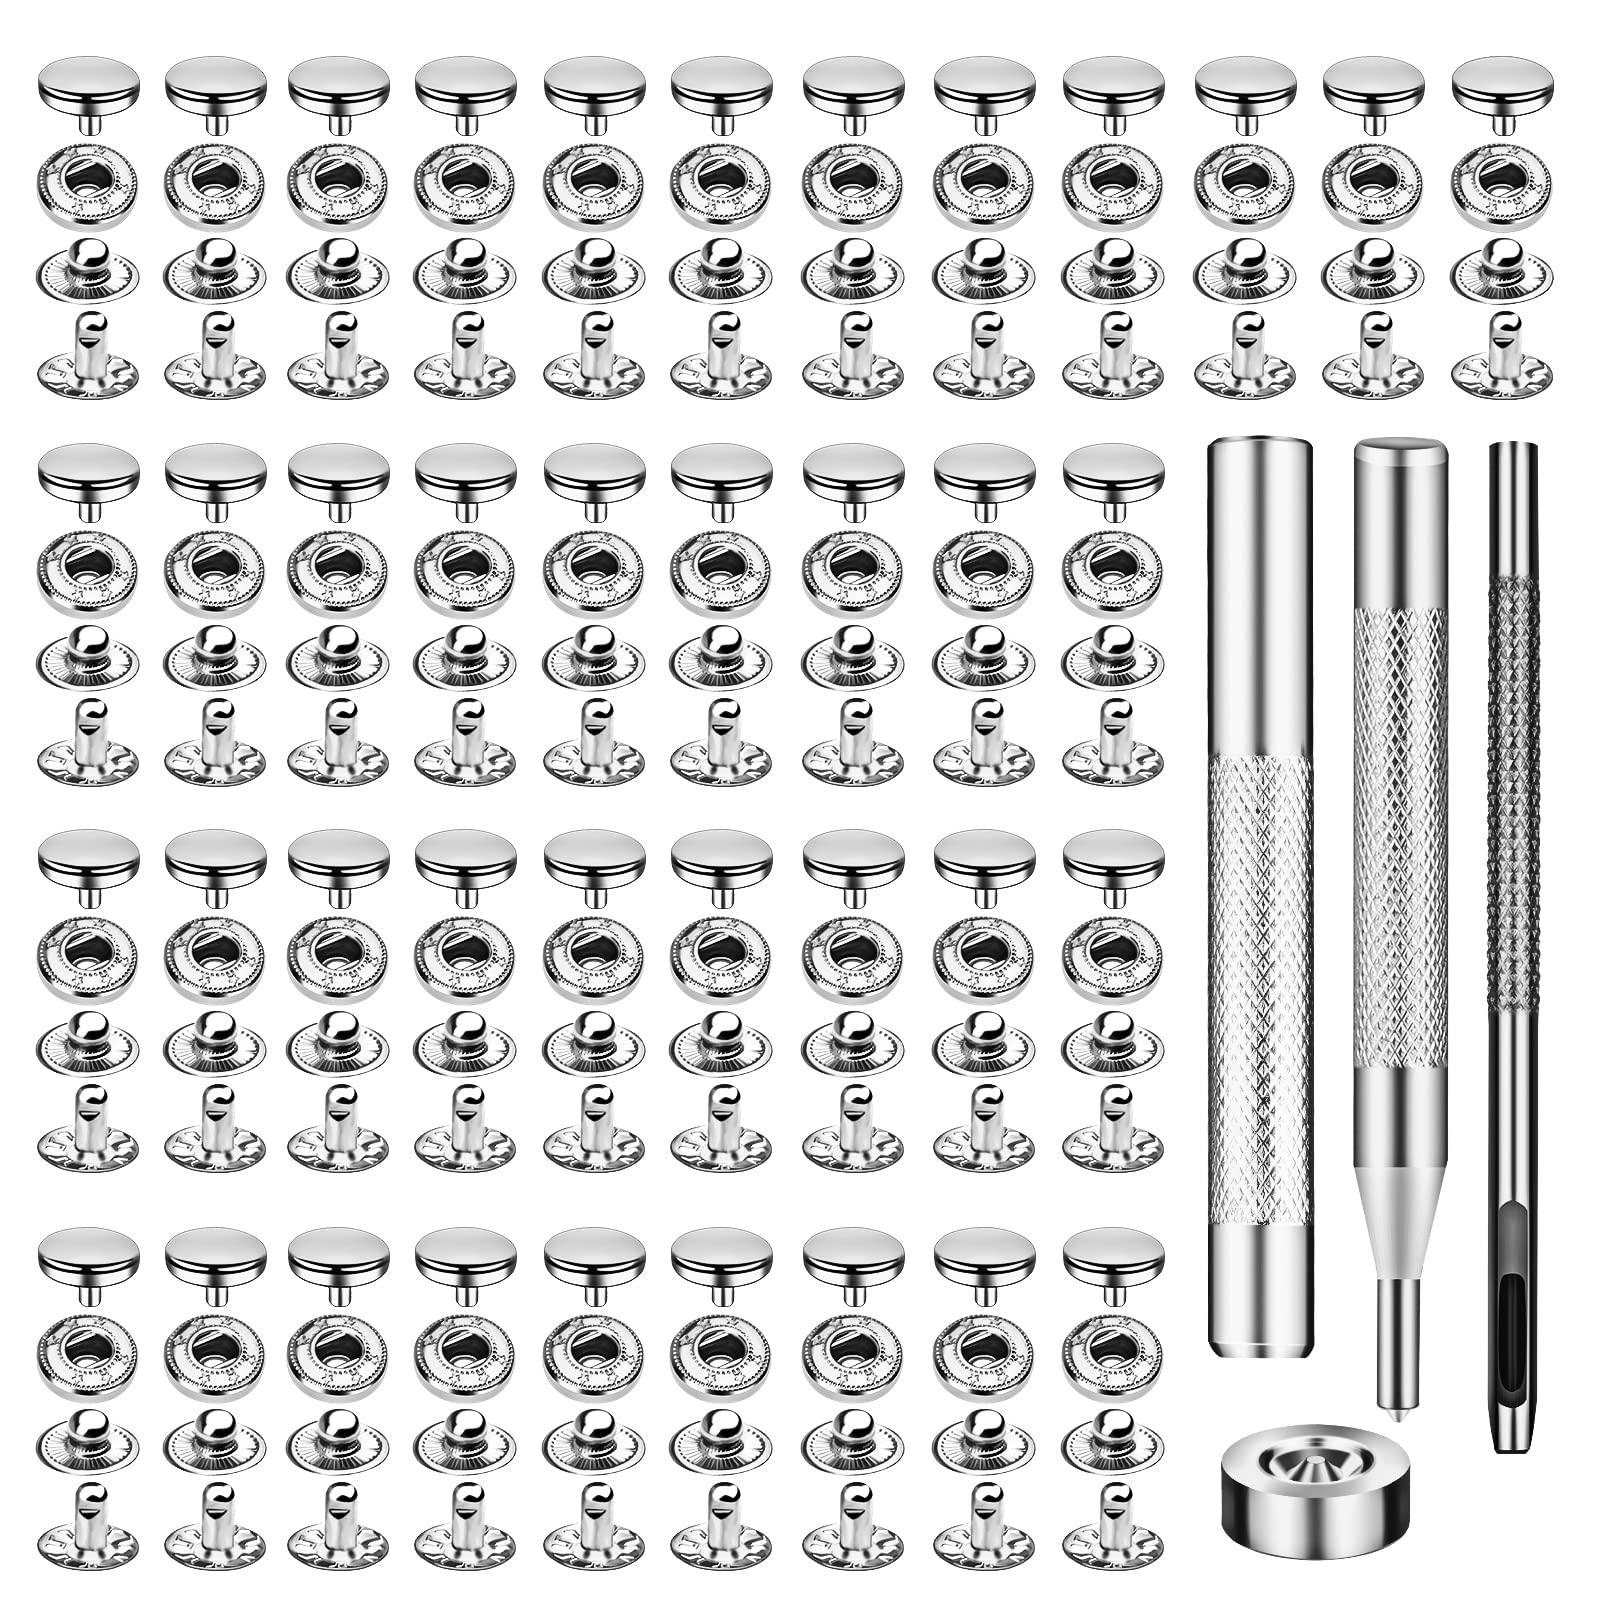 TLKKUE 50 Sets Leather Snap Fasteners Kit 10mm Silver Metal Snap Buttons  kit Stainless Steel with 4pcs Snap Fastener Installation Tools for Sewing  Clothing Bracelets Jackets Bags Belt DIY Crafts